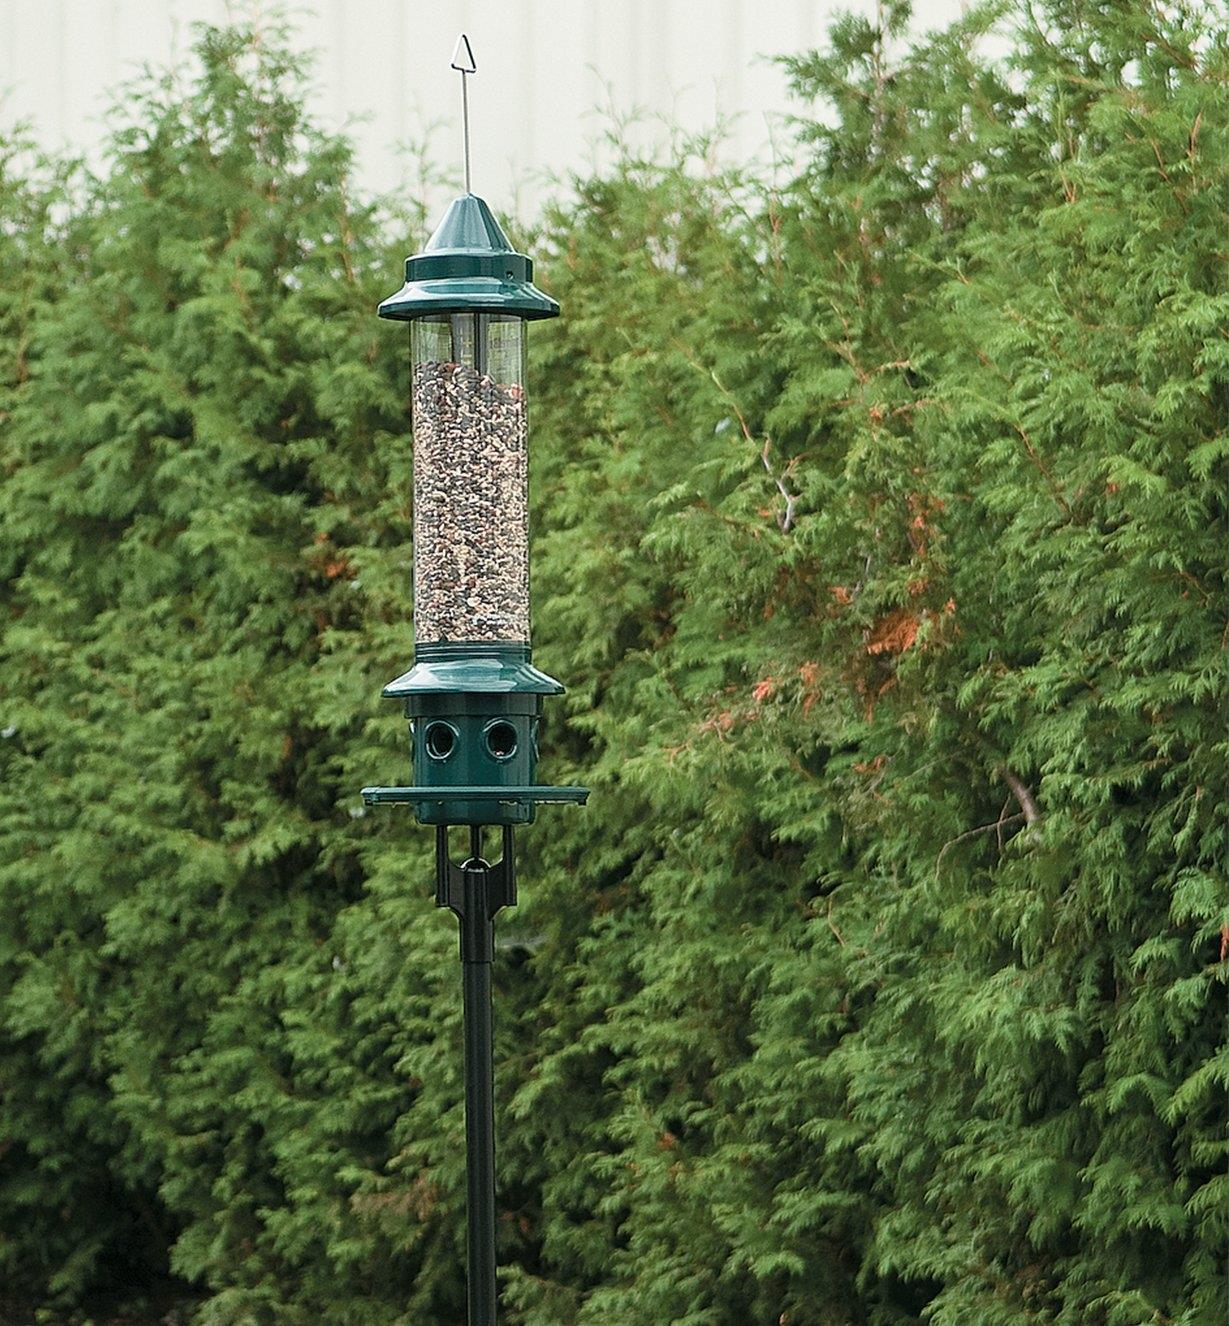 Pole adapter installed on a pole in a garden, supporting a Squirrel Buster feeder